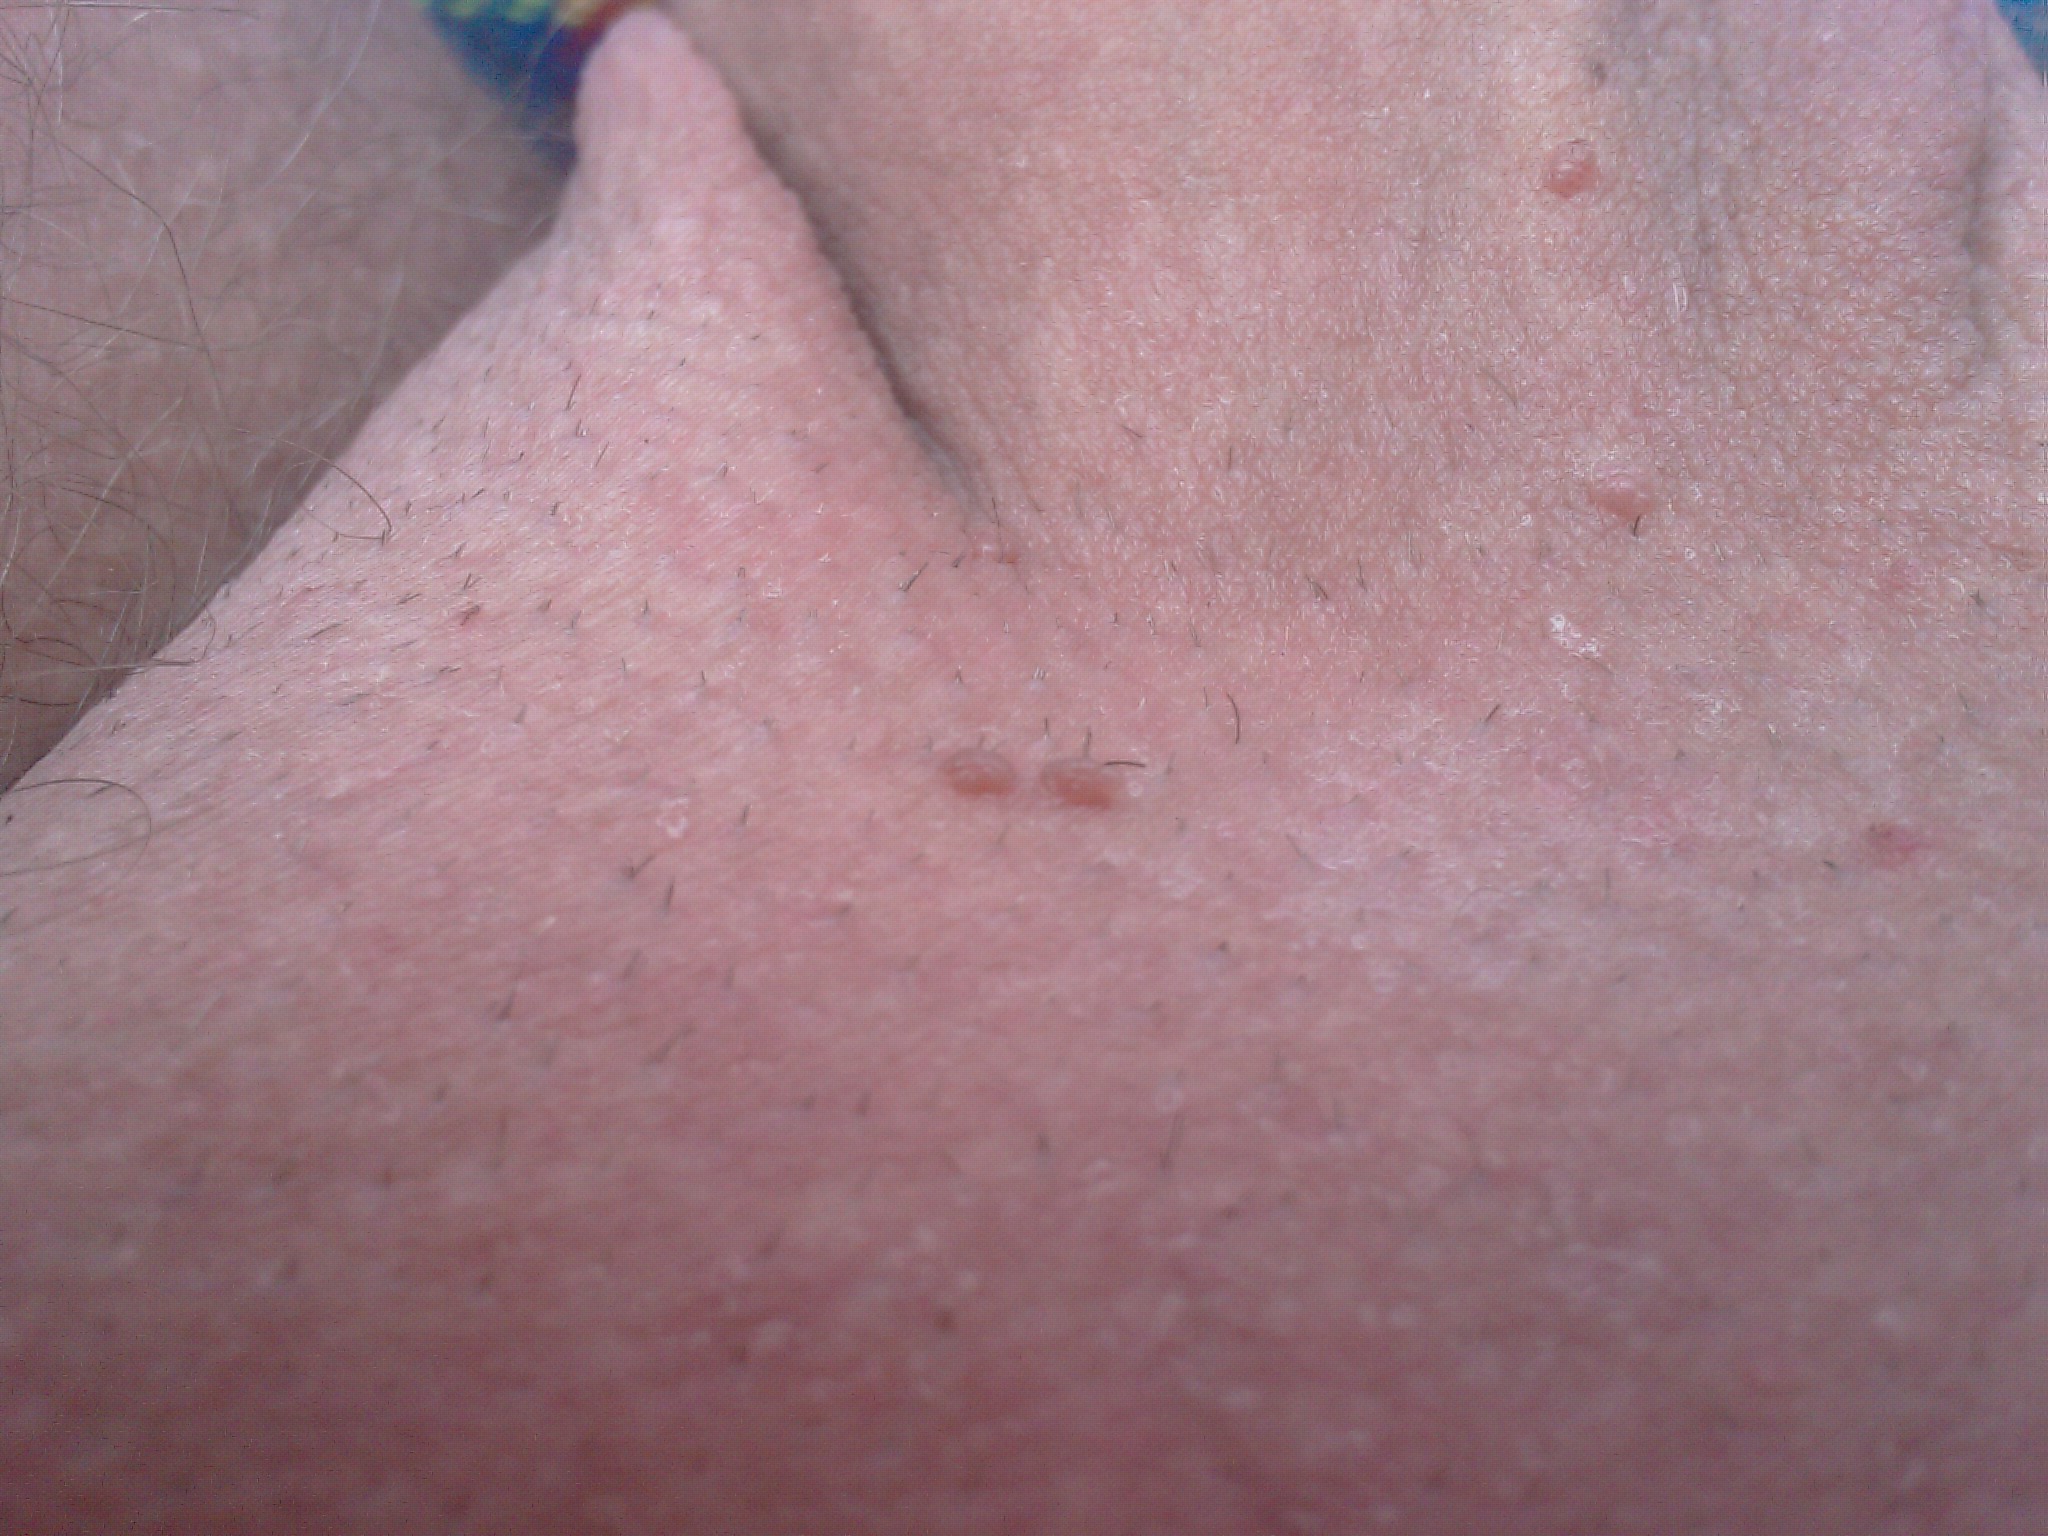 Shaved base of a penis, with genital warts.